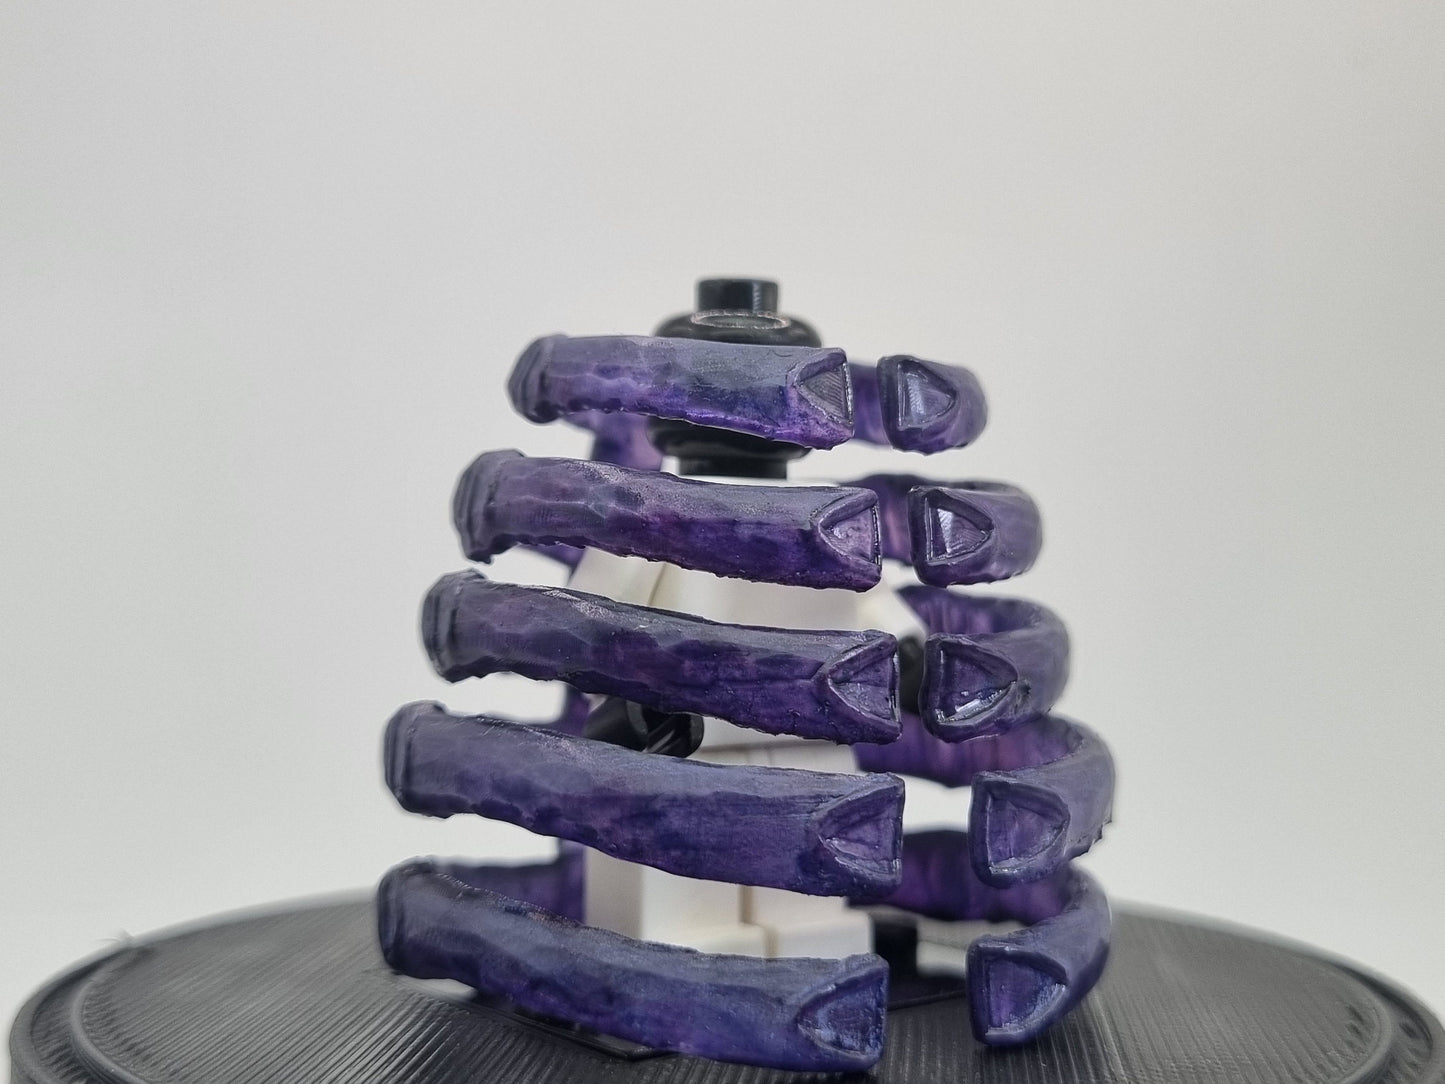 Building toy custom 3D printed and painted ninja ribcage!